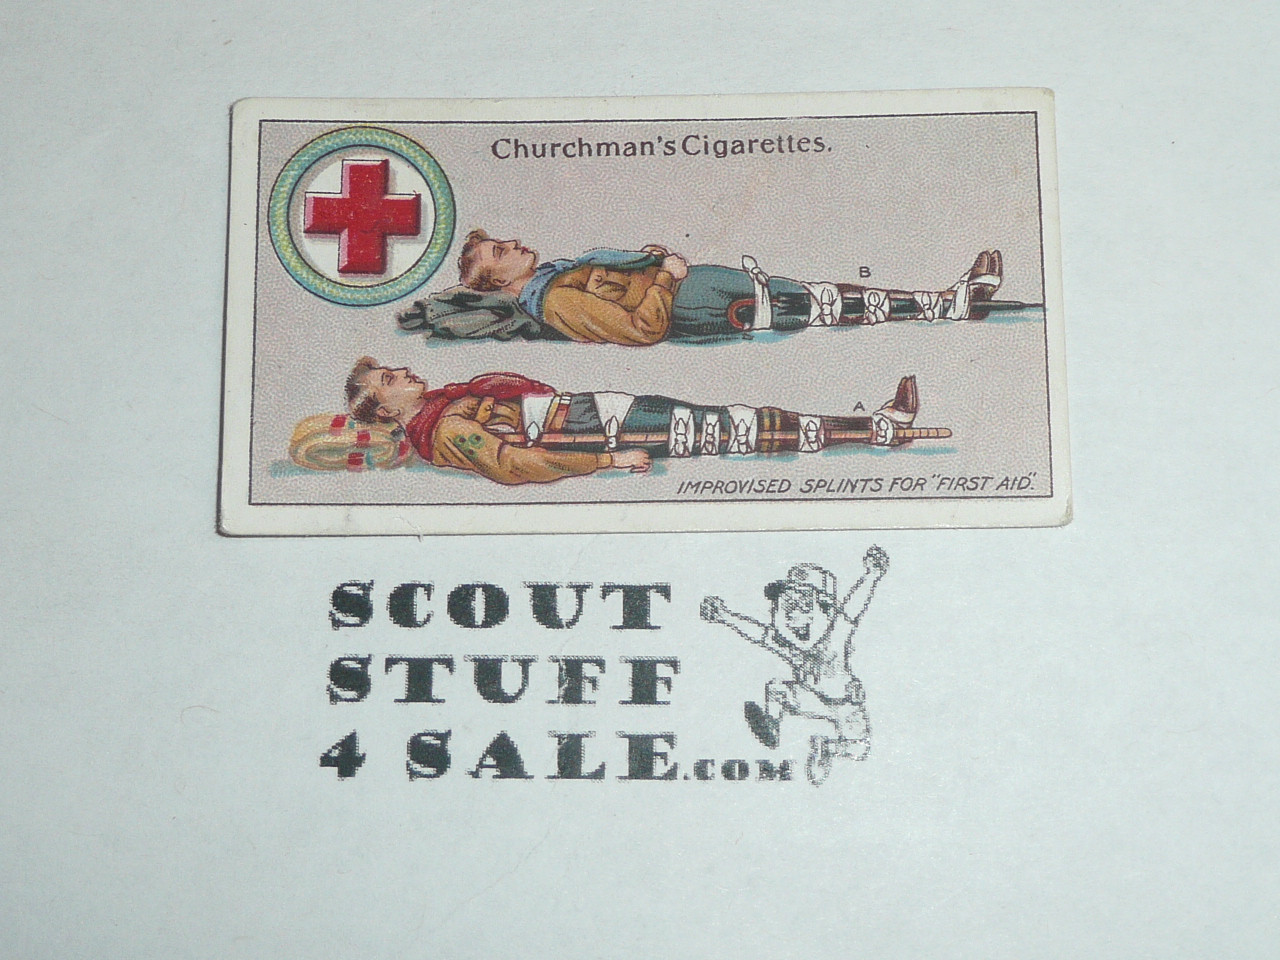 Churchman Cigarette Company Premium Card, Boy Scout Series of 50, Card #19 Improvised Splints for First Aid, 1916